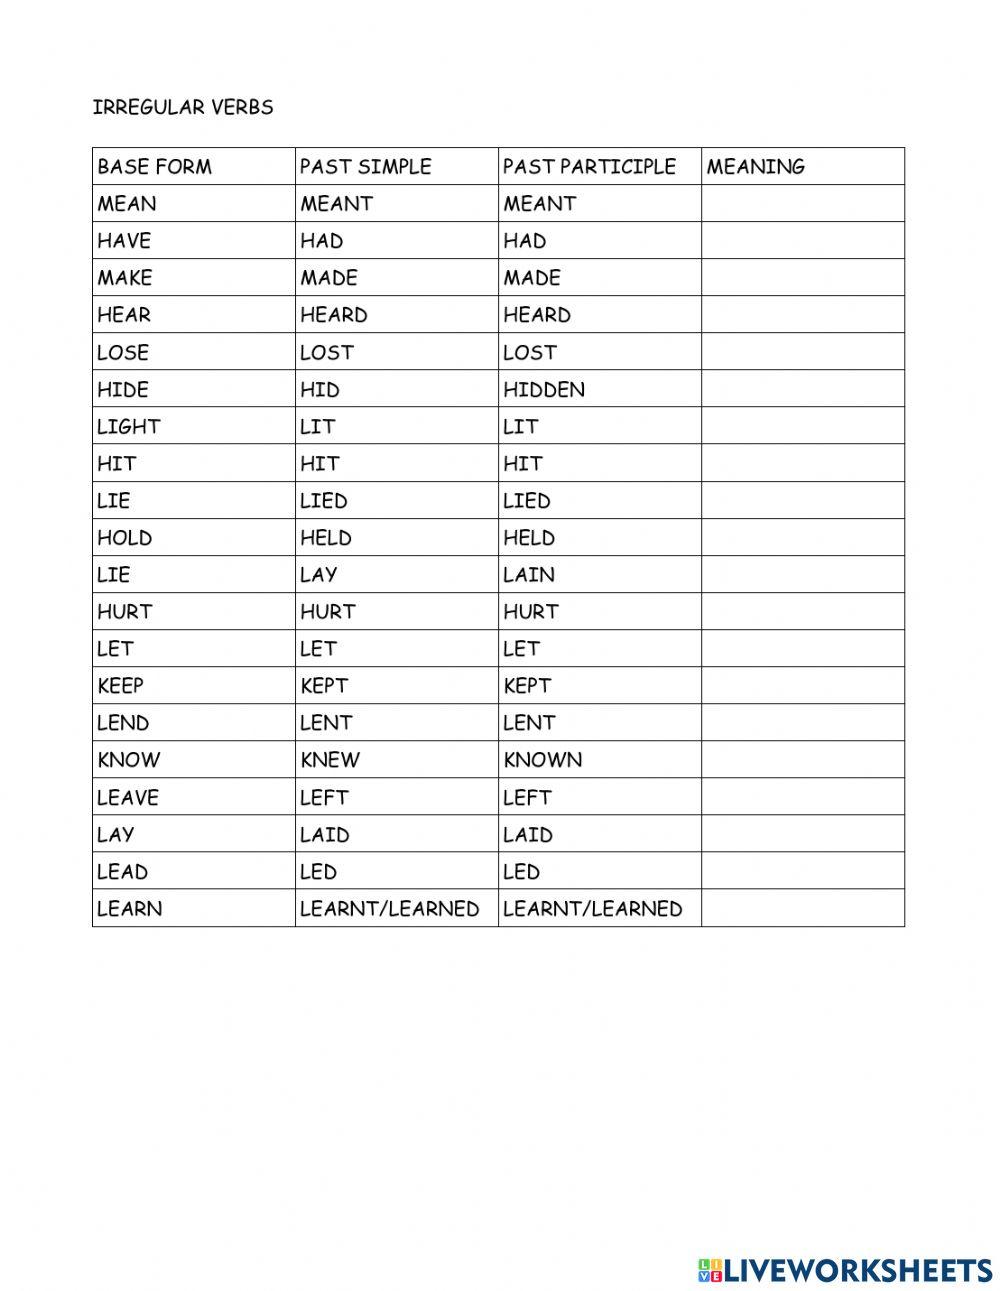 Irregular verbs write the meaning